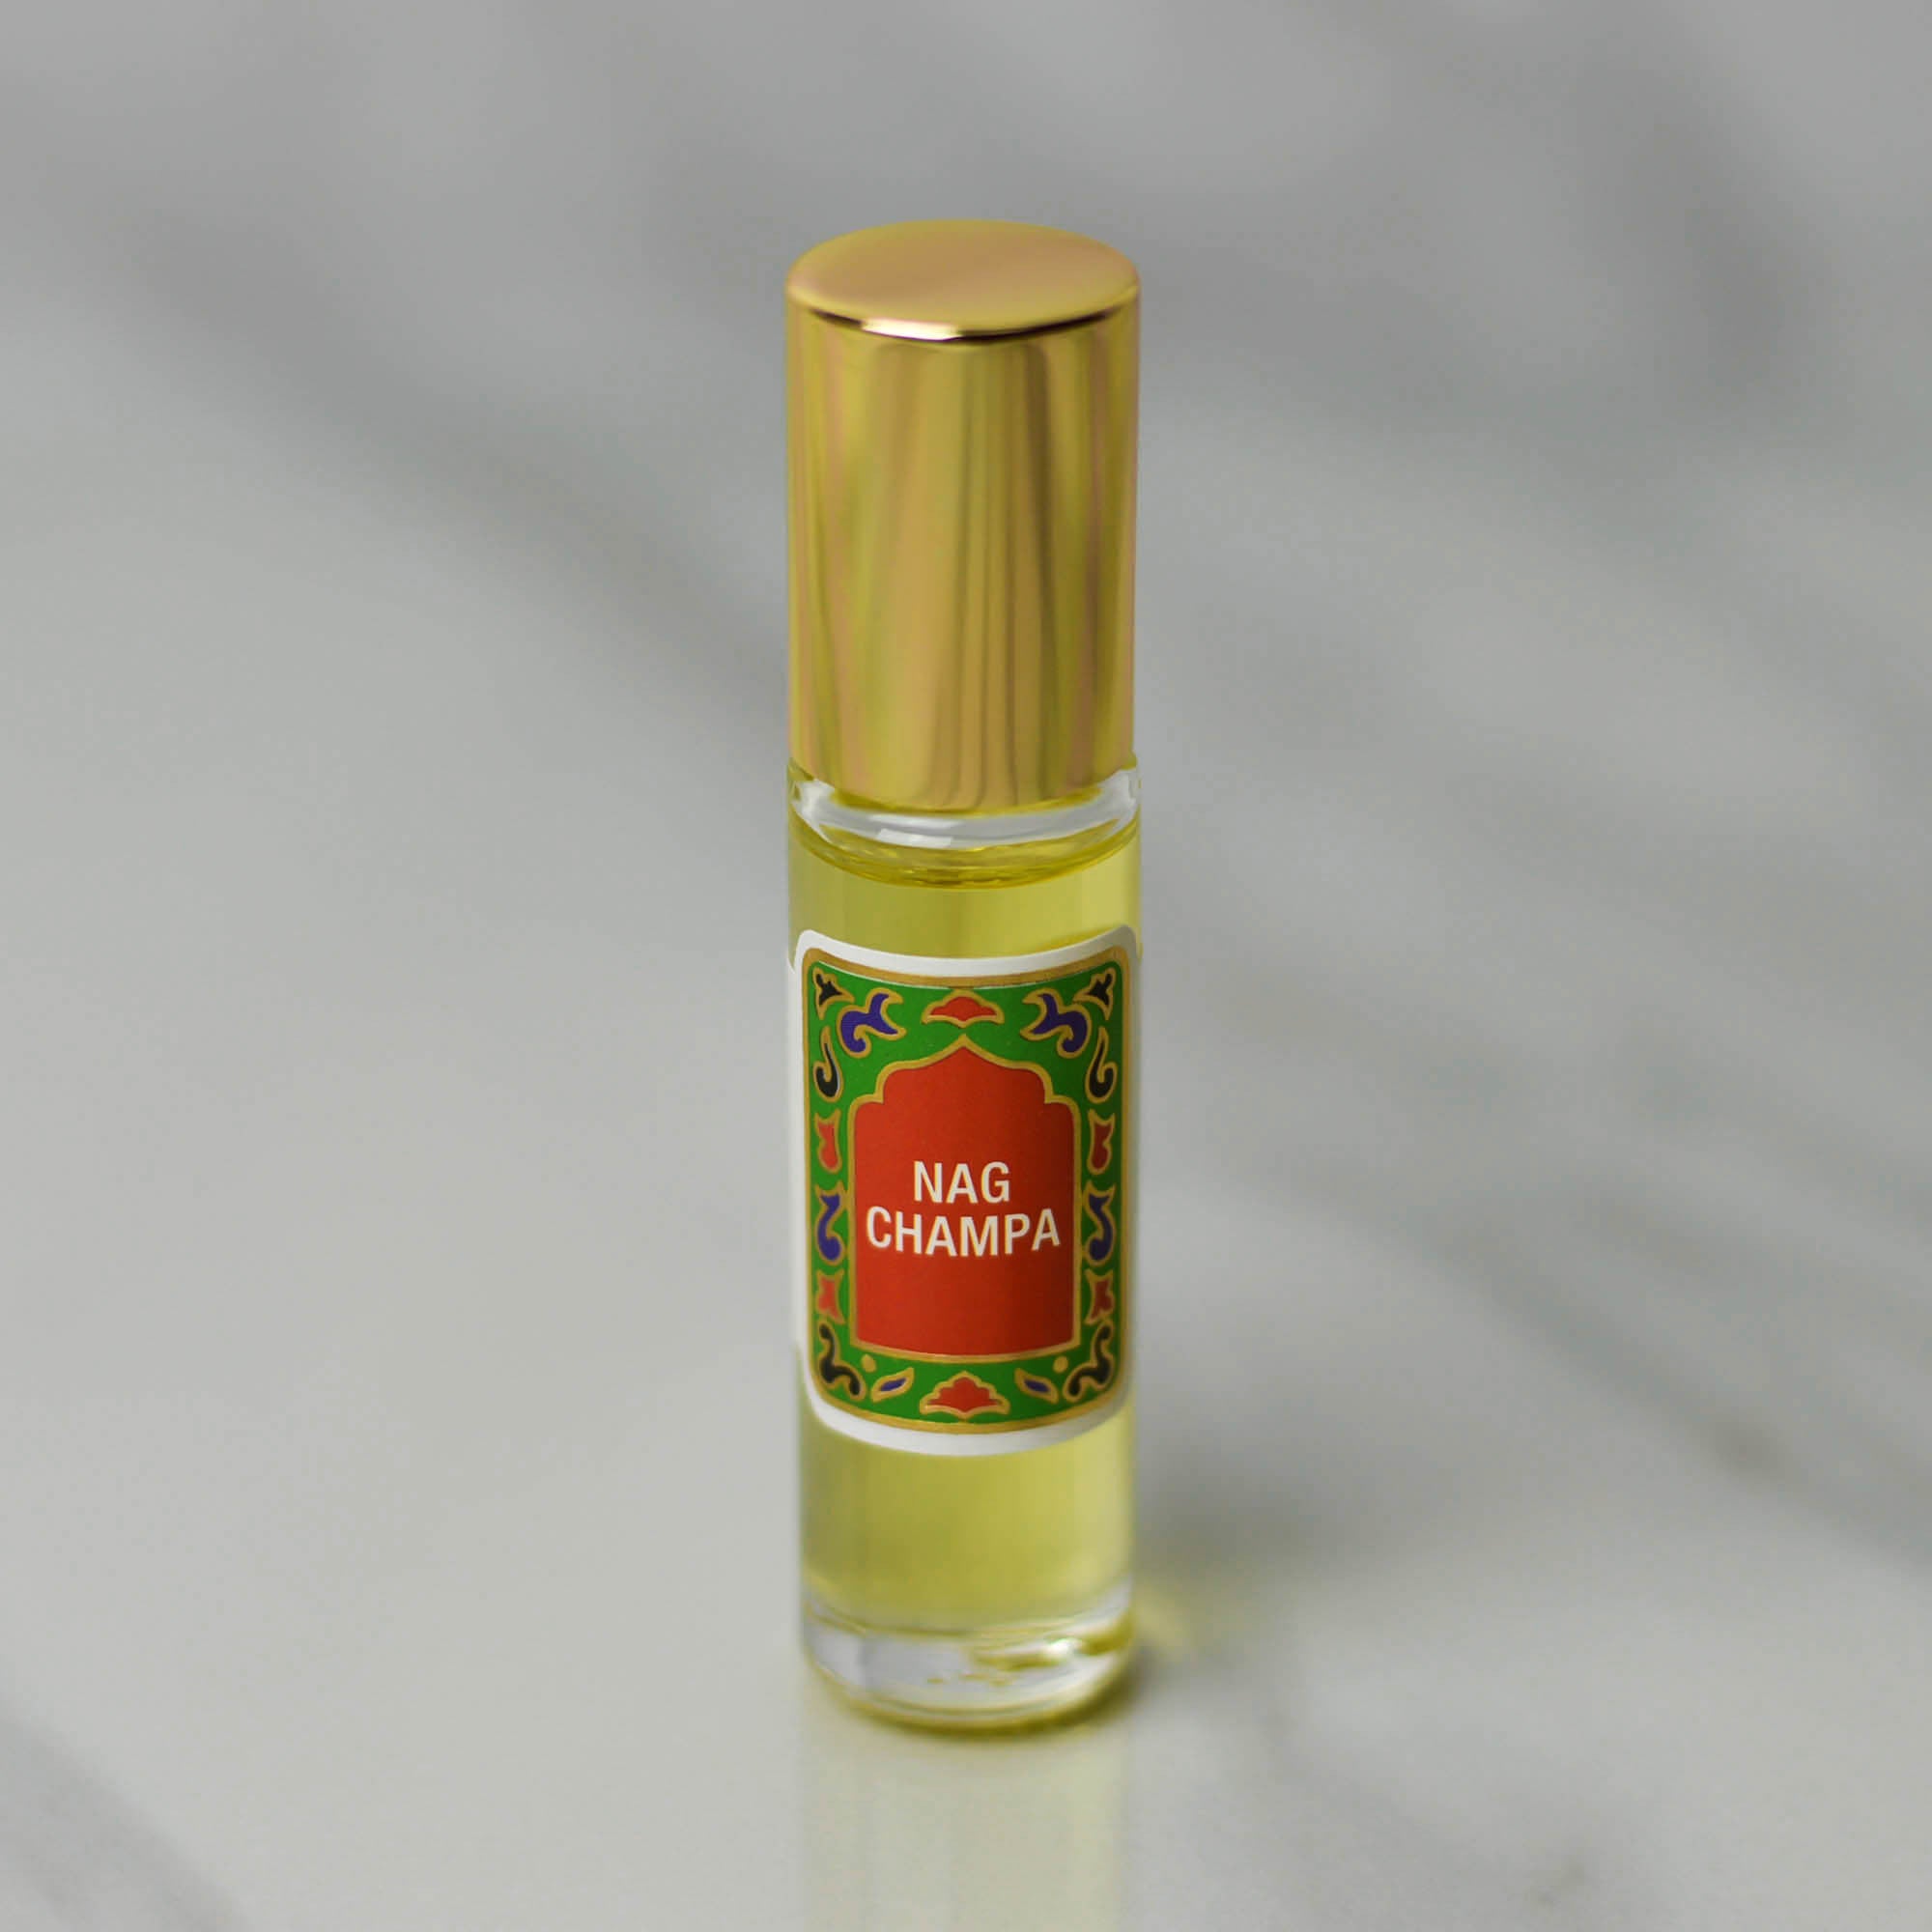 NAG CHAMPA Natural Perfume Roll on With Patchouli, Sandalwood, Champaca  Essential Oils, All Natural, Alcohol Free .33 Oz. 